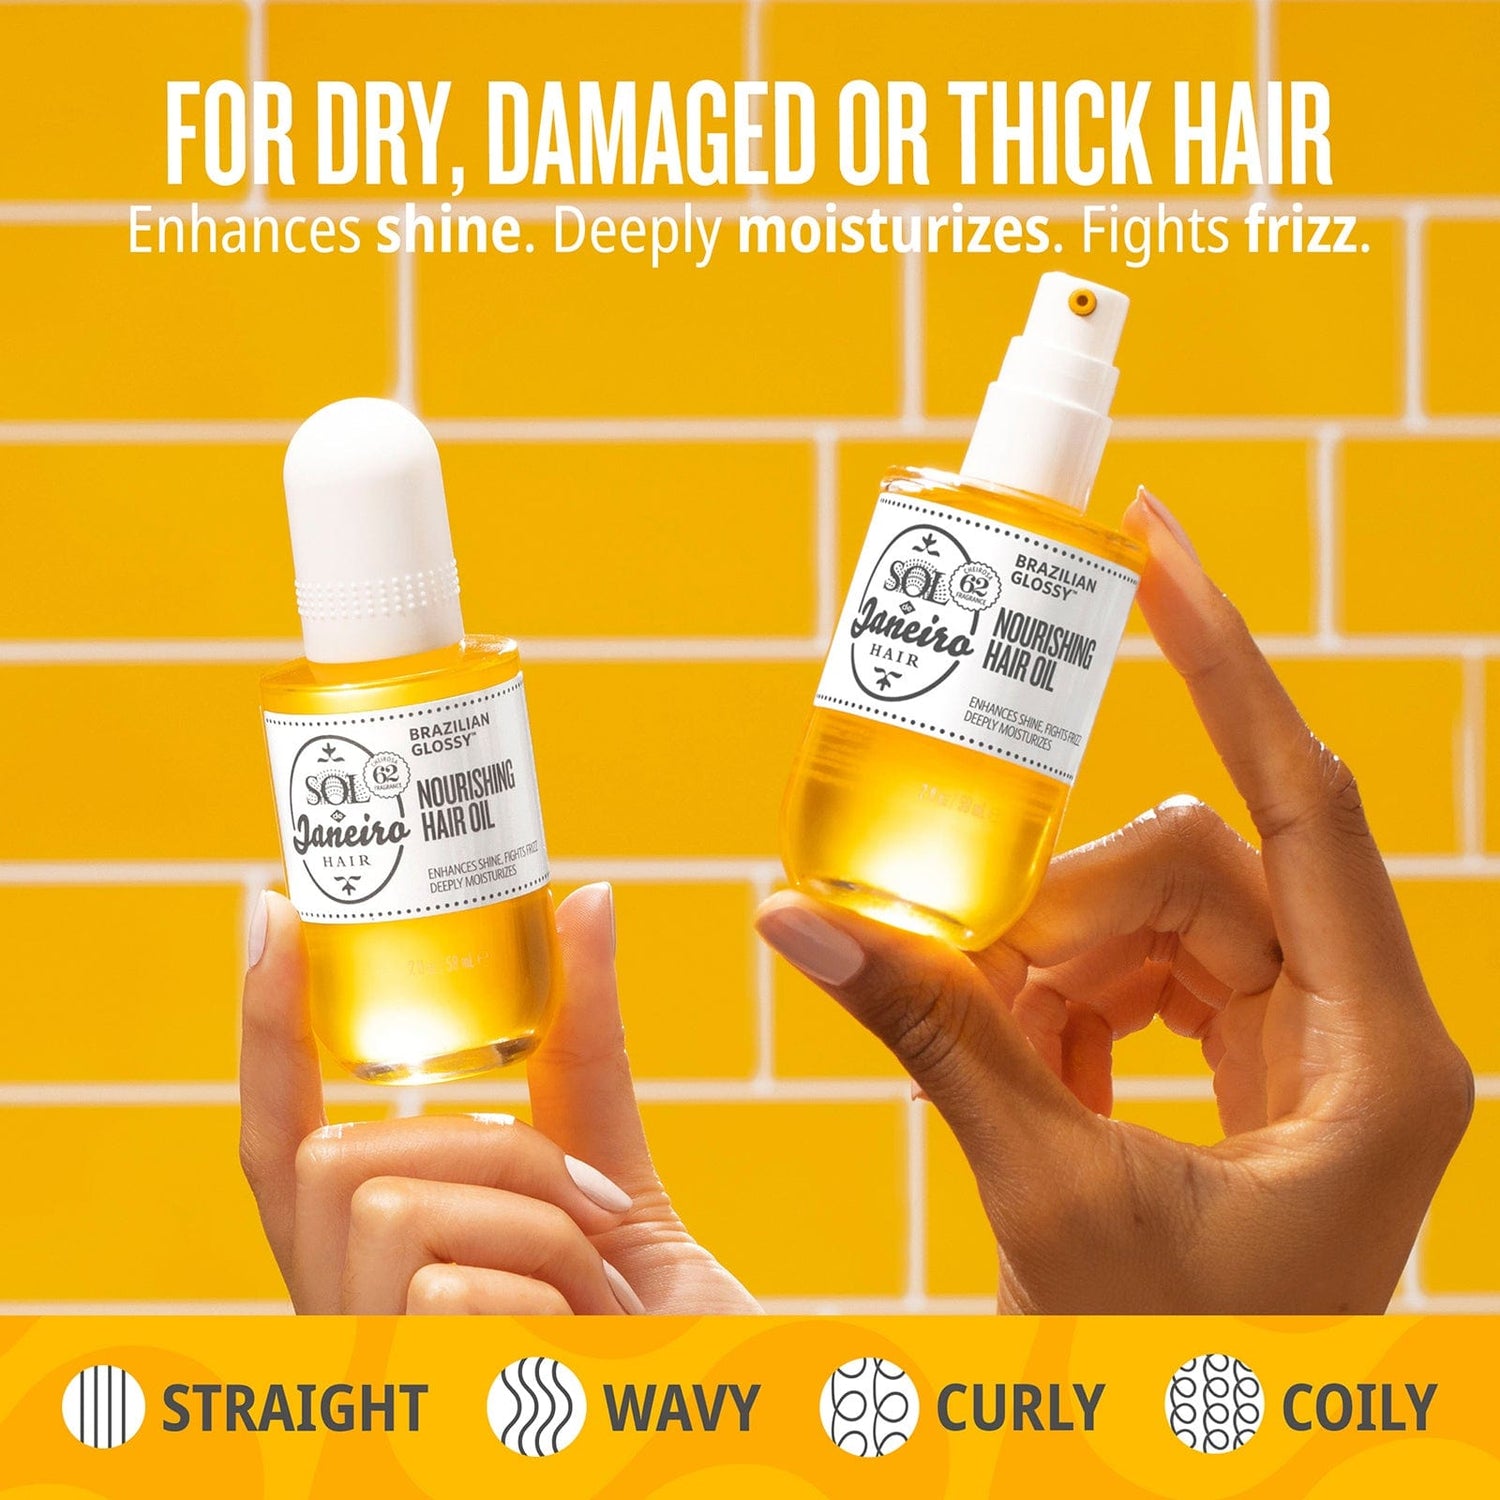 For all types of dry, damaged hair - enhances shine. deeoly moisturizes. fights frizz. - straight | wavy | Curly | Coily